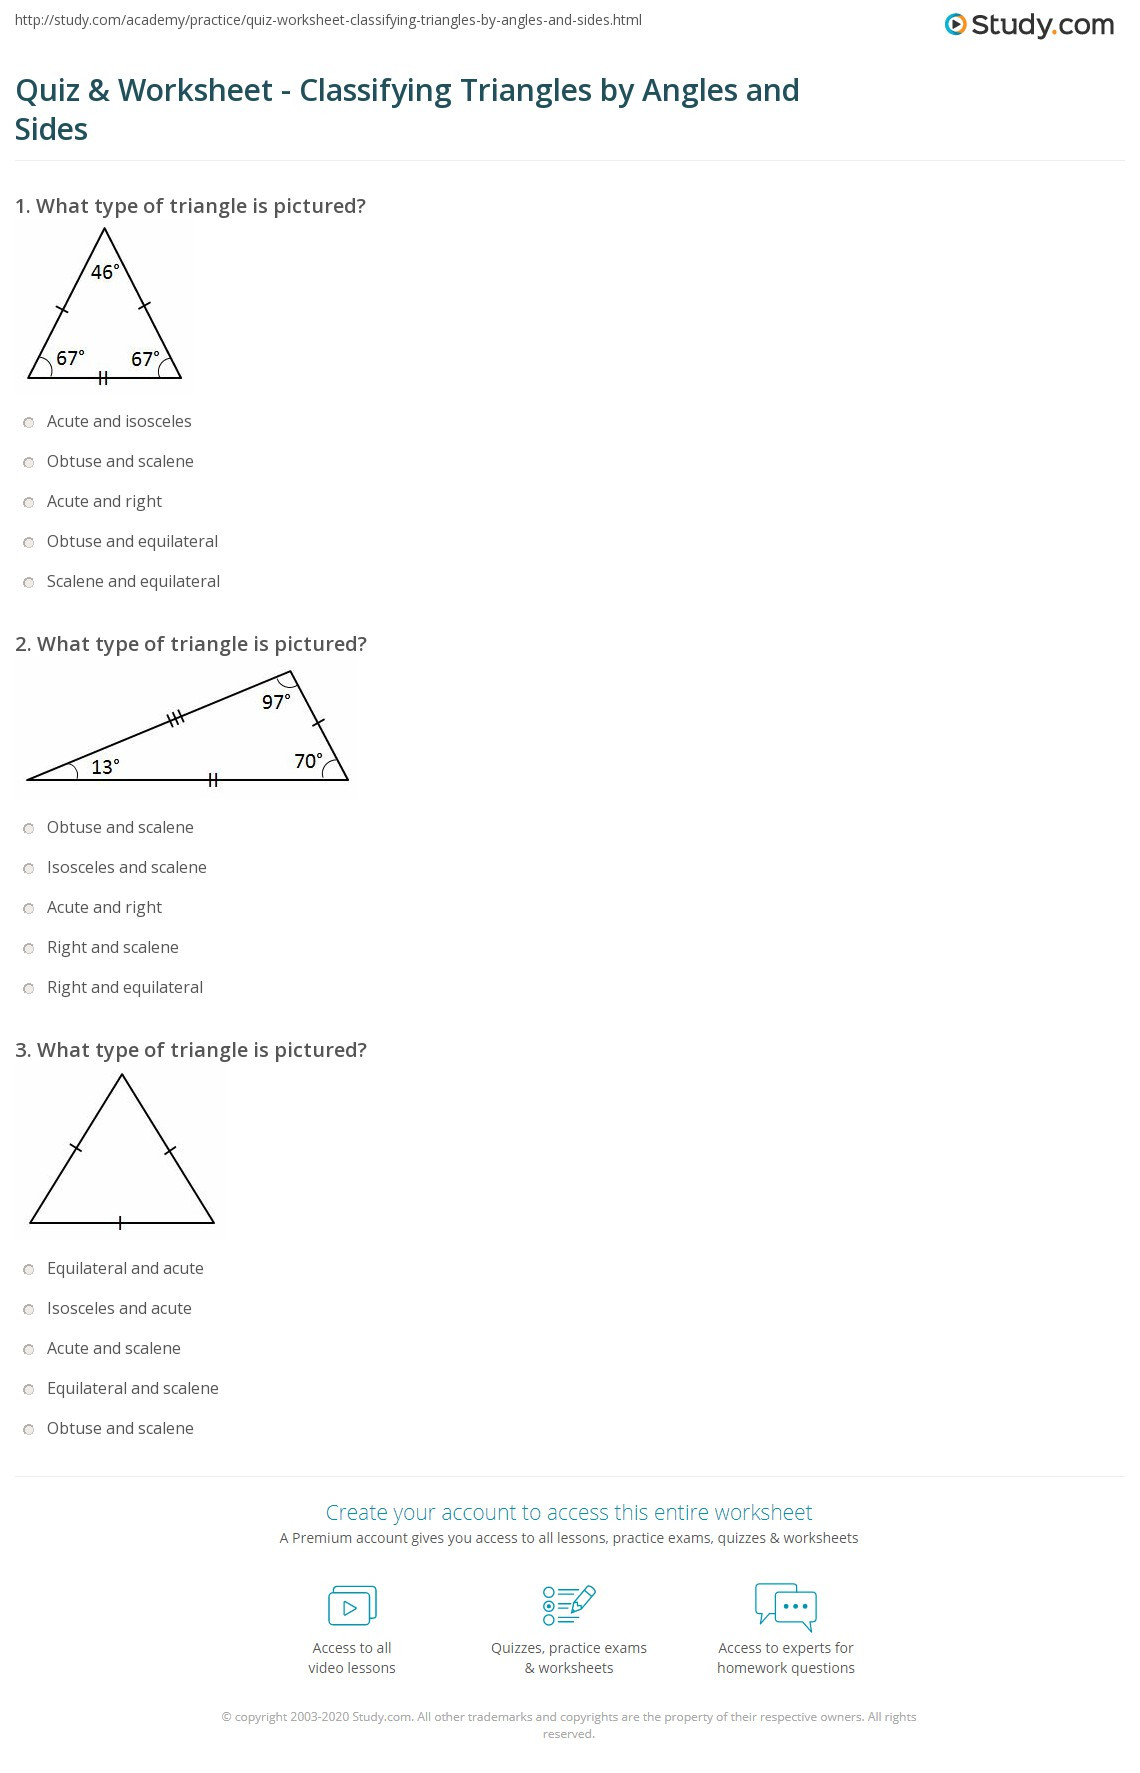 Angles In A Triangle Worksheet Quiz &amp; Worksheet Classifying Triangles by Angles and Sides